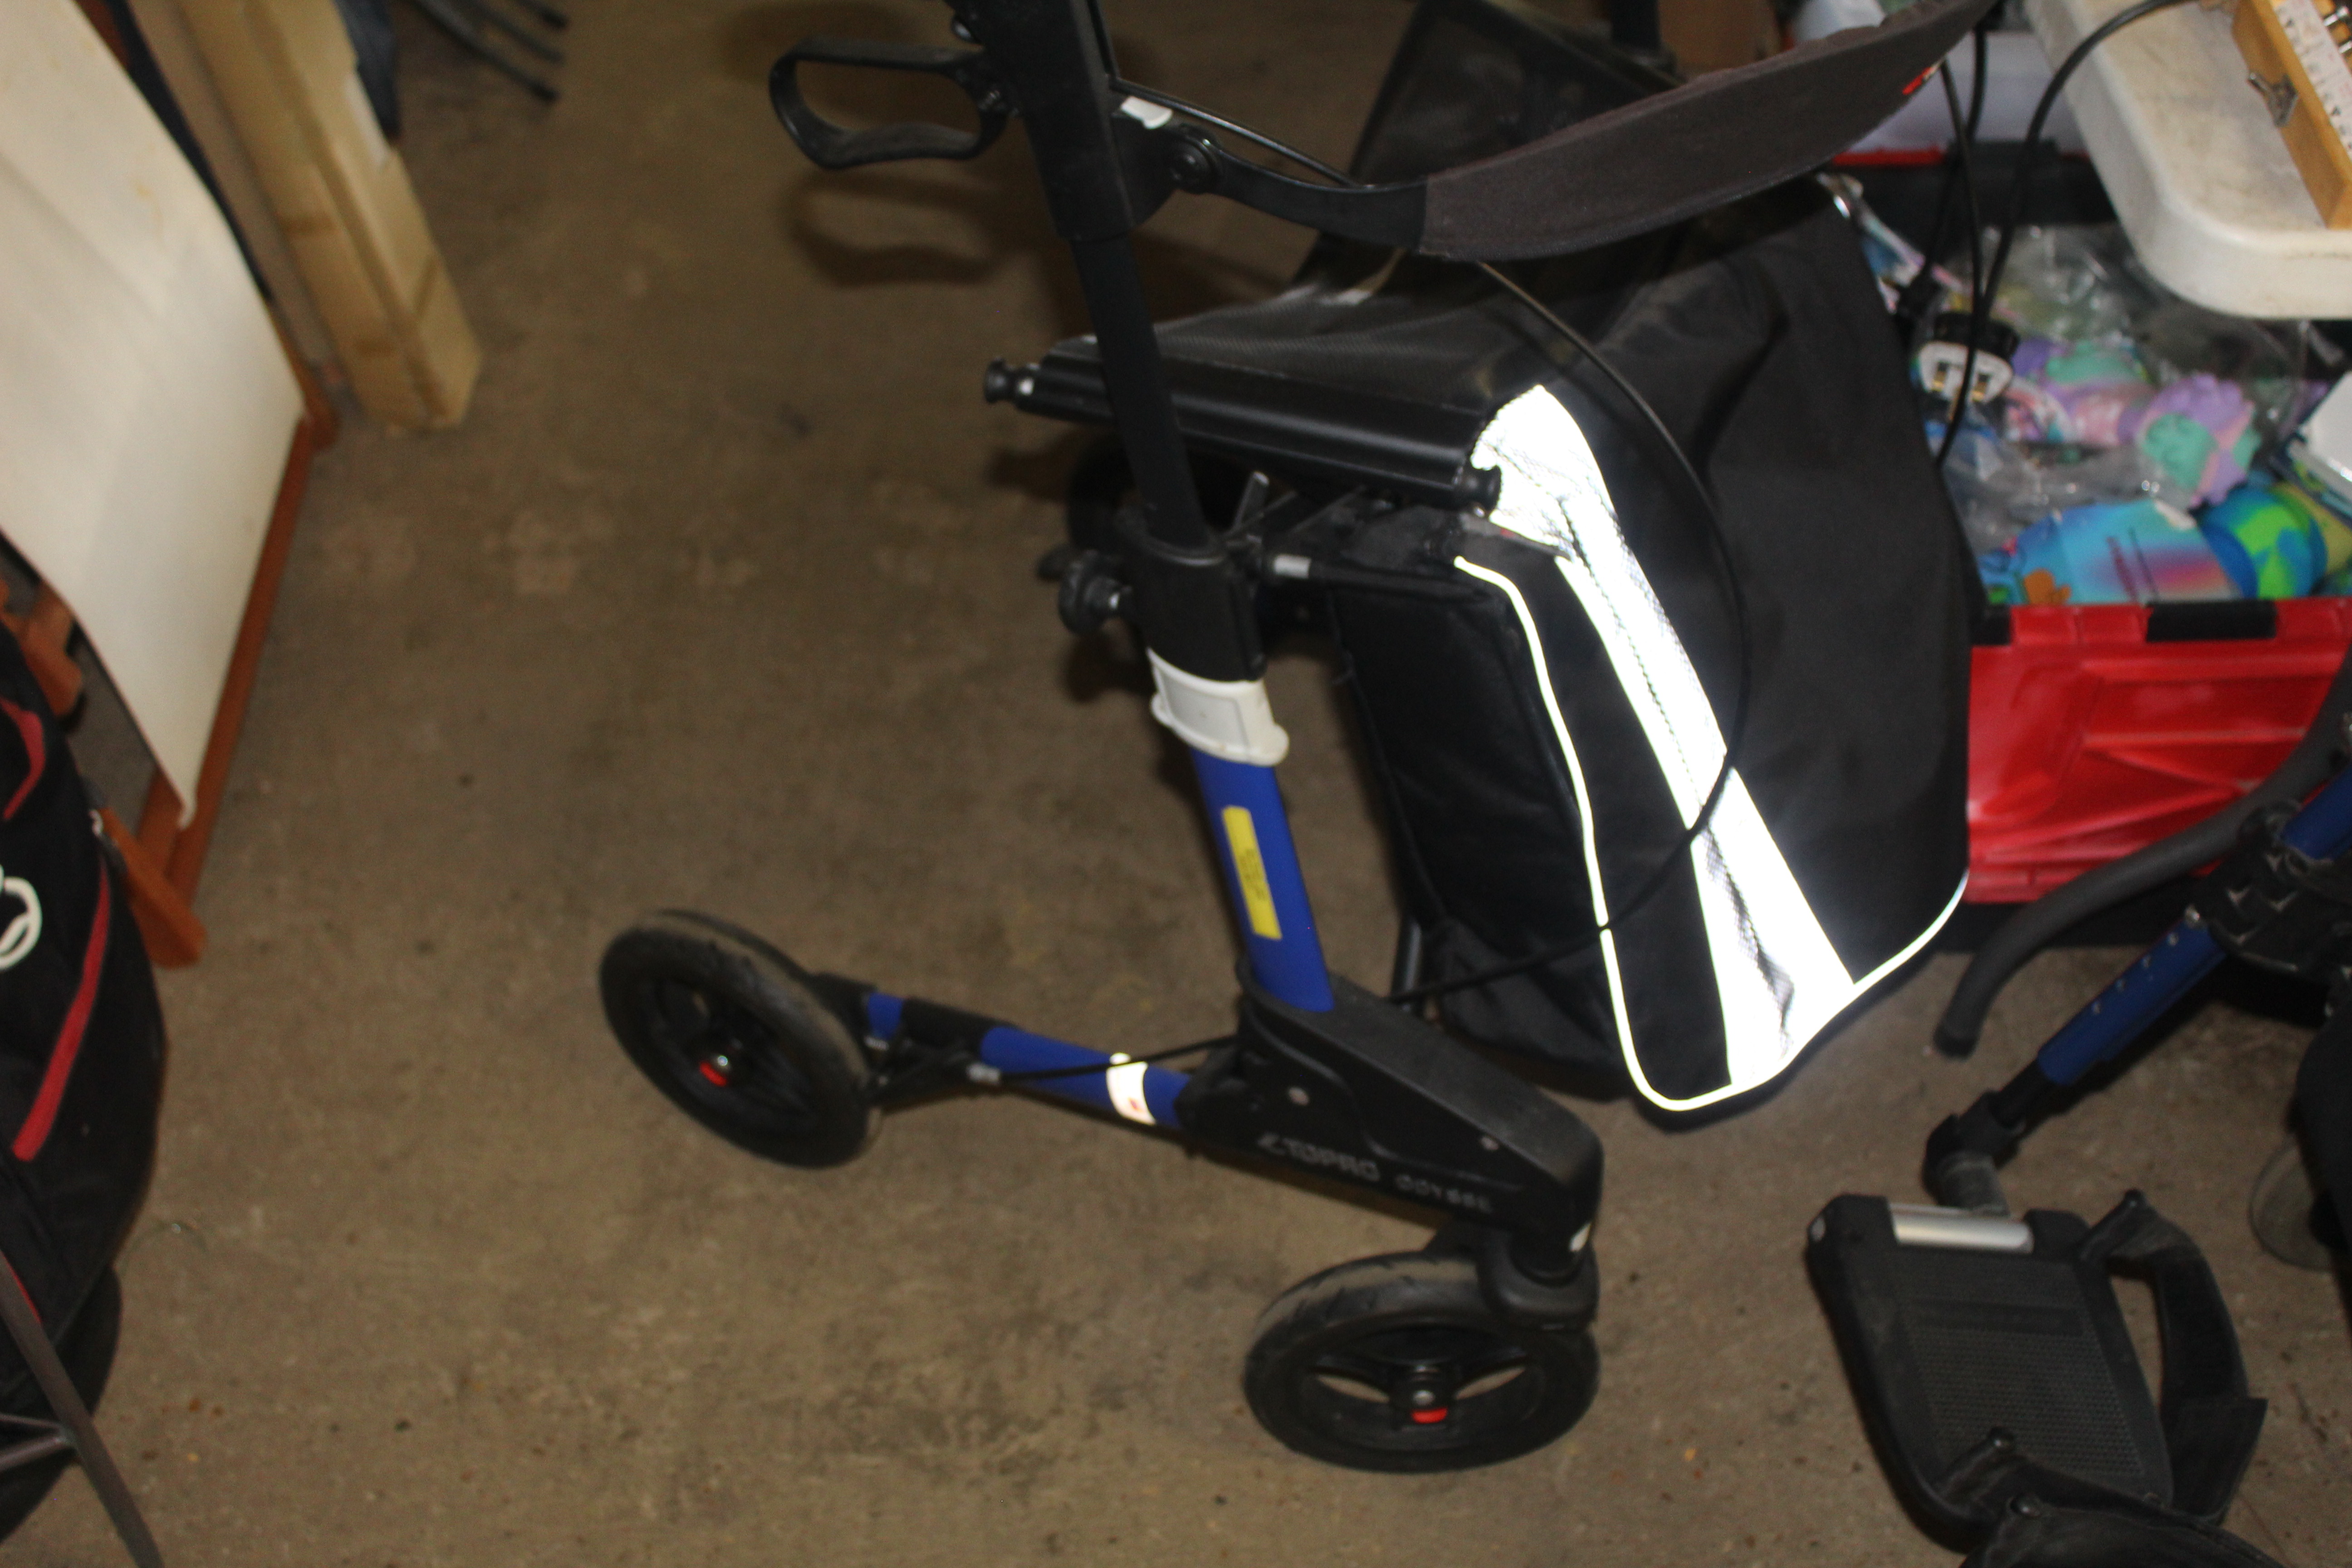 A Topro Odysse folding stroller with front carryin - Image 2 of 3